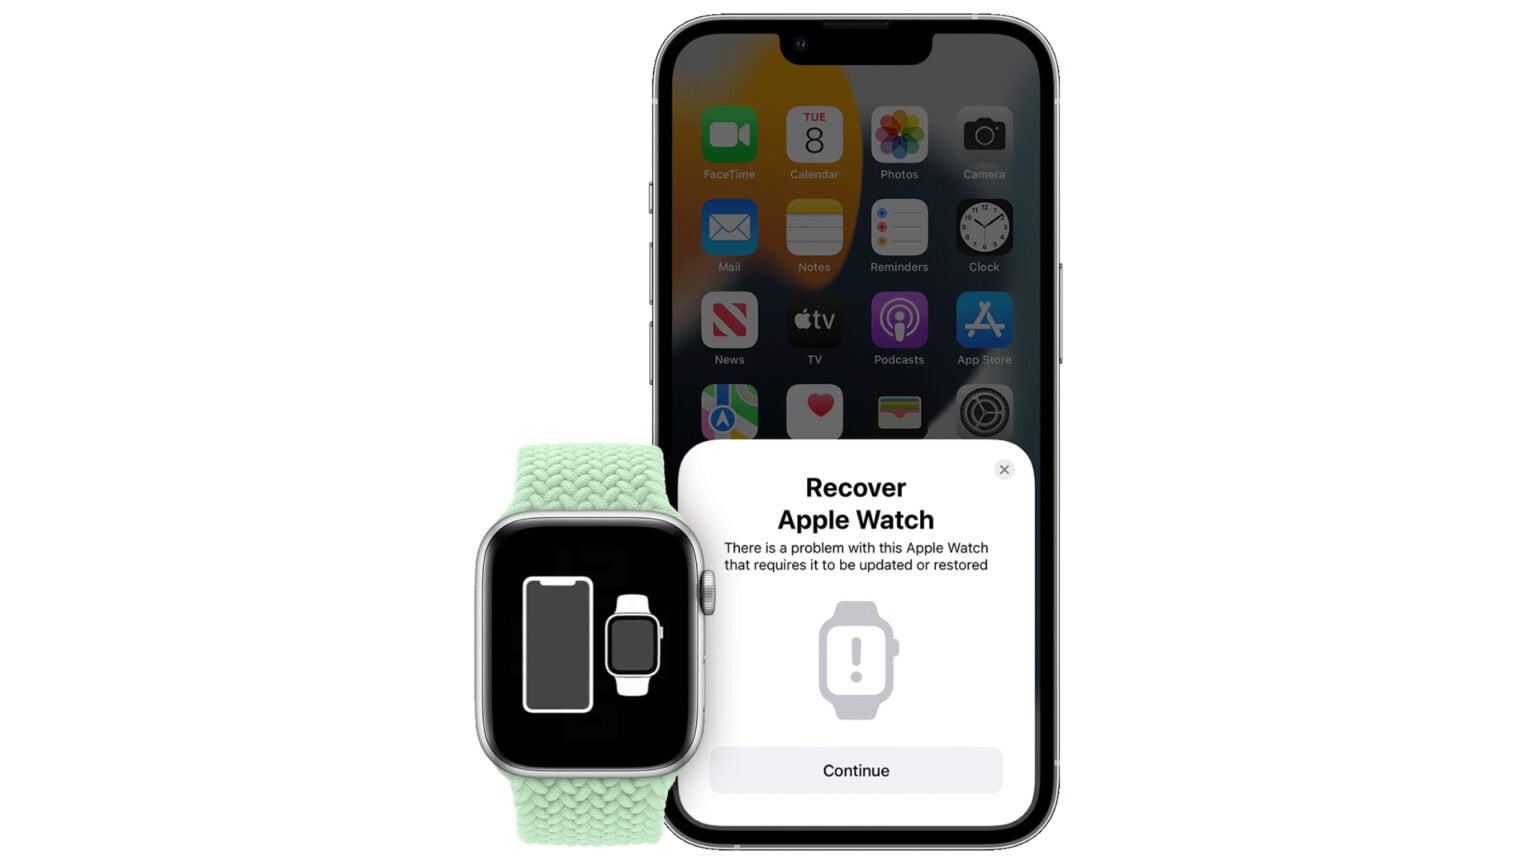 You can now restore Apple Watch with iPhone